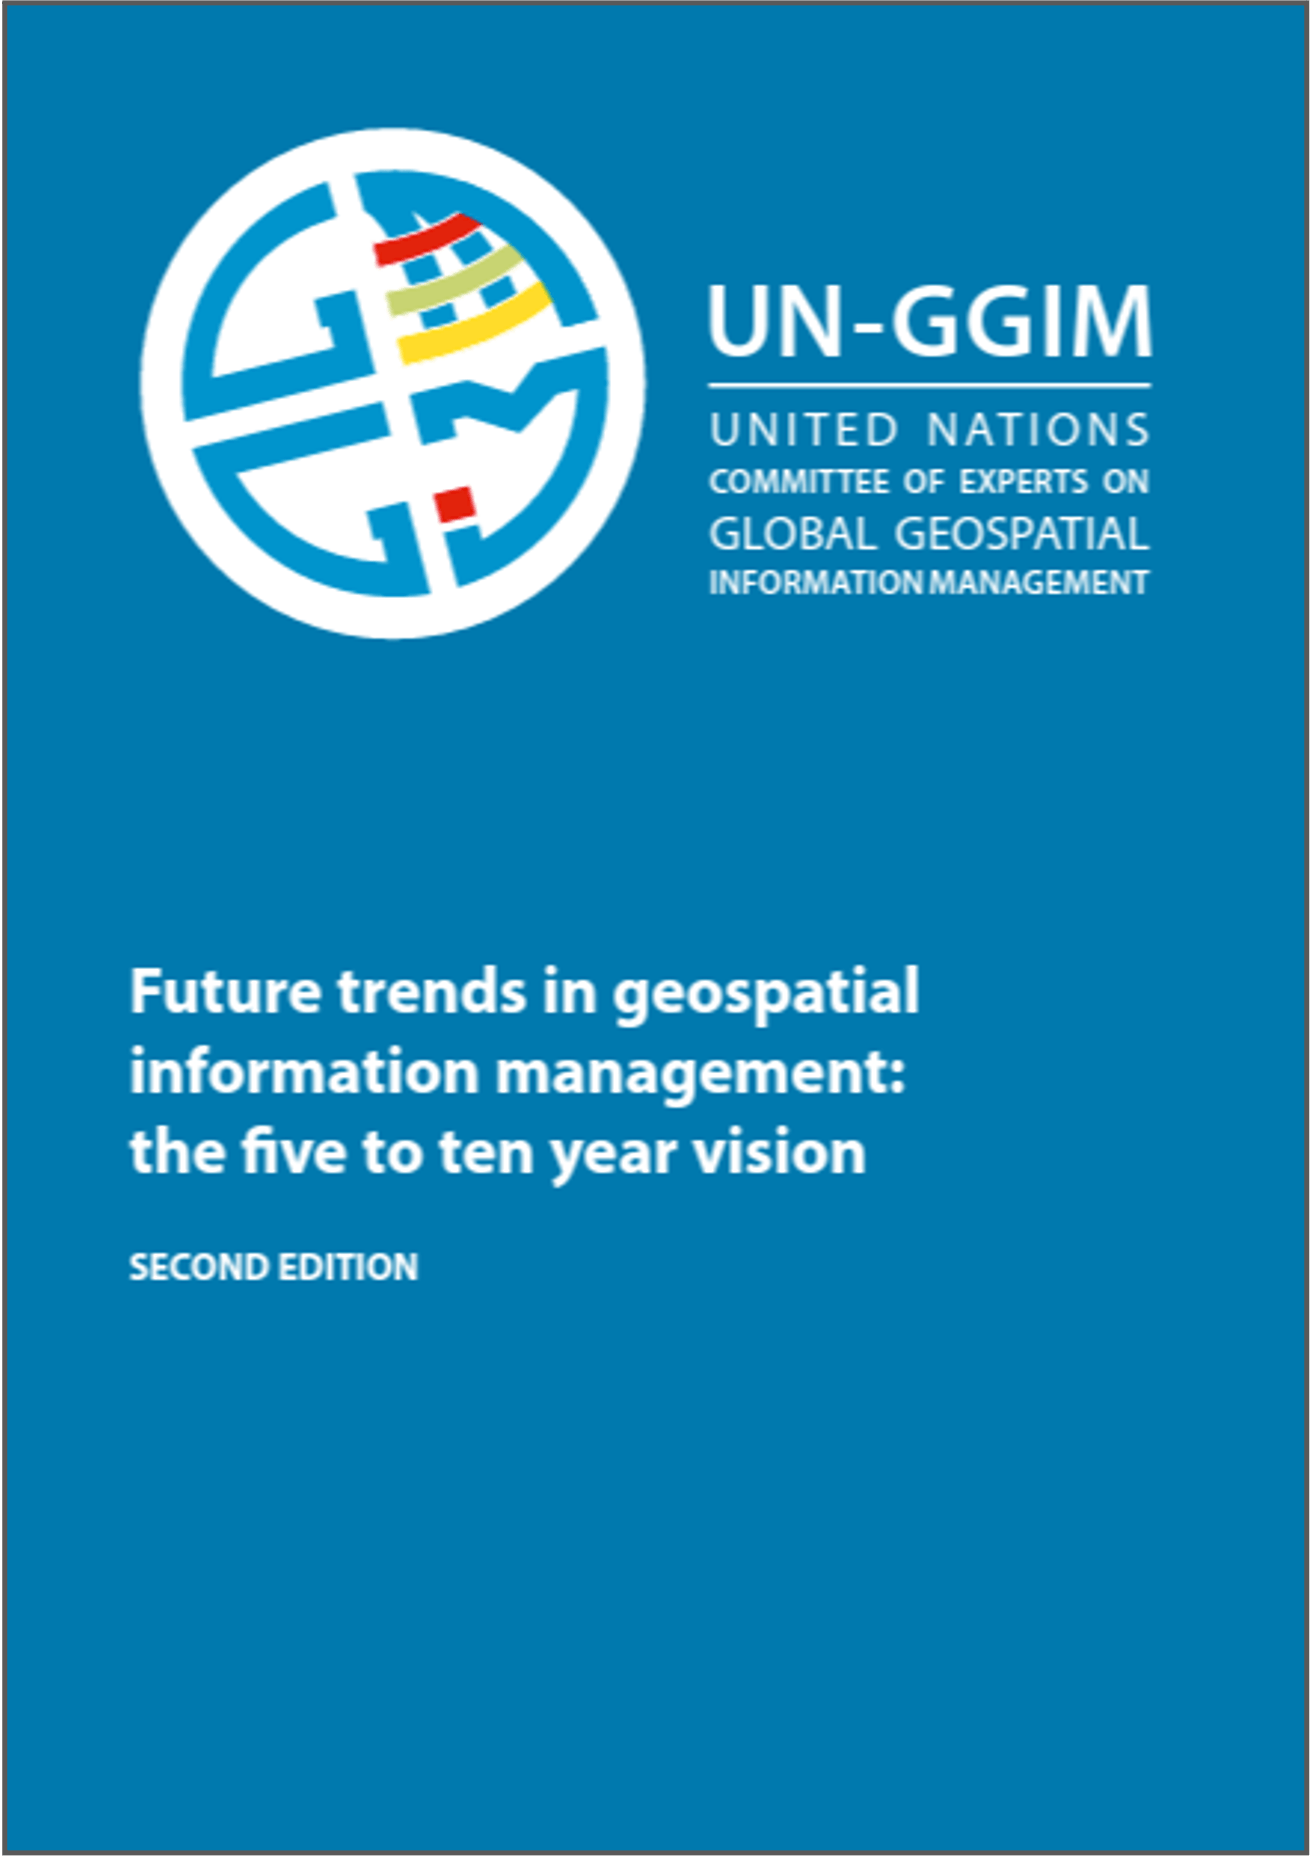 Future trends in geospatial information management: the five to ten year vision (2nd Edition)